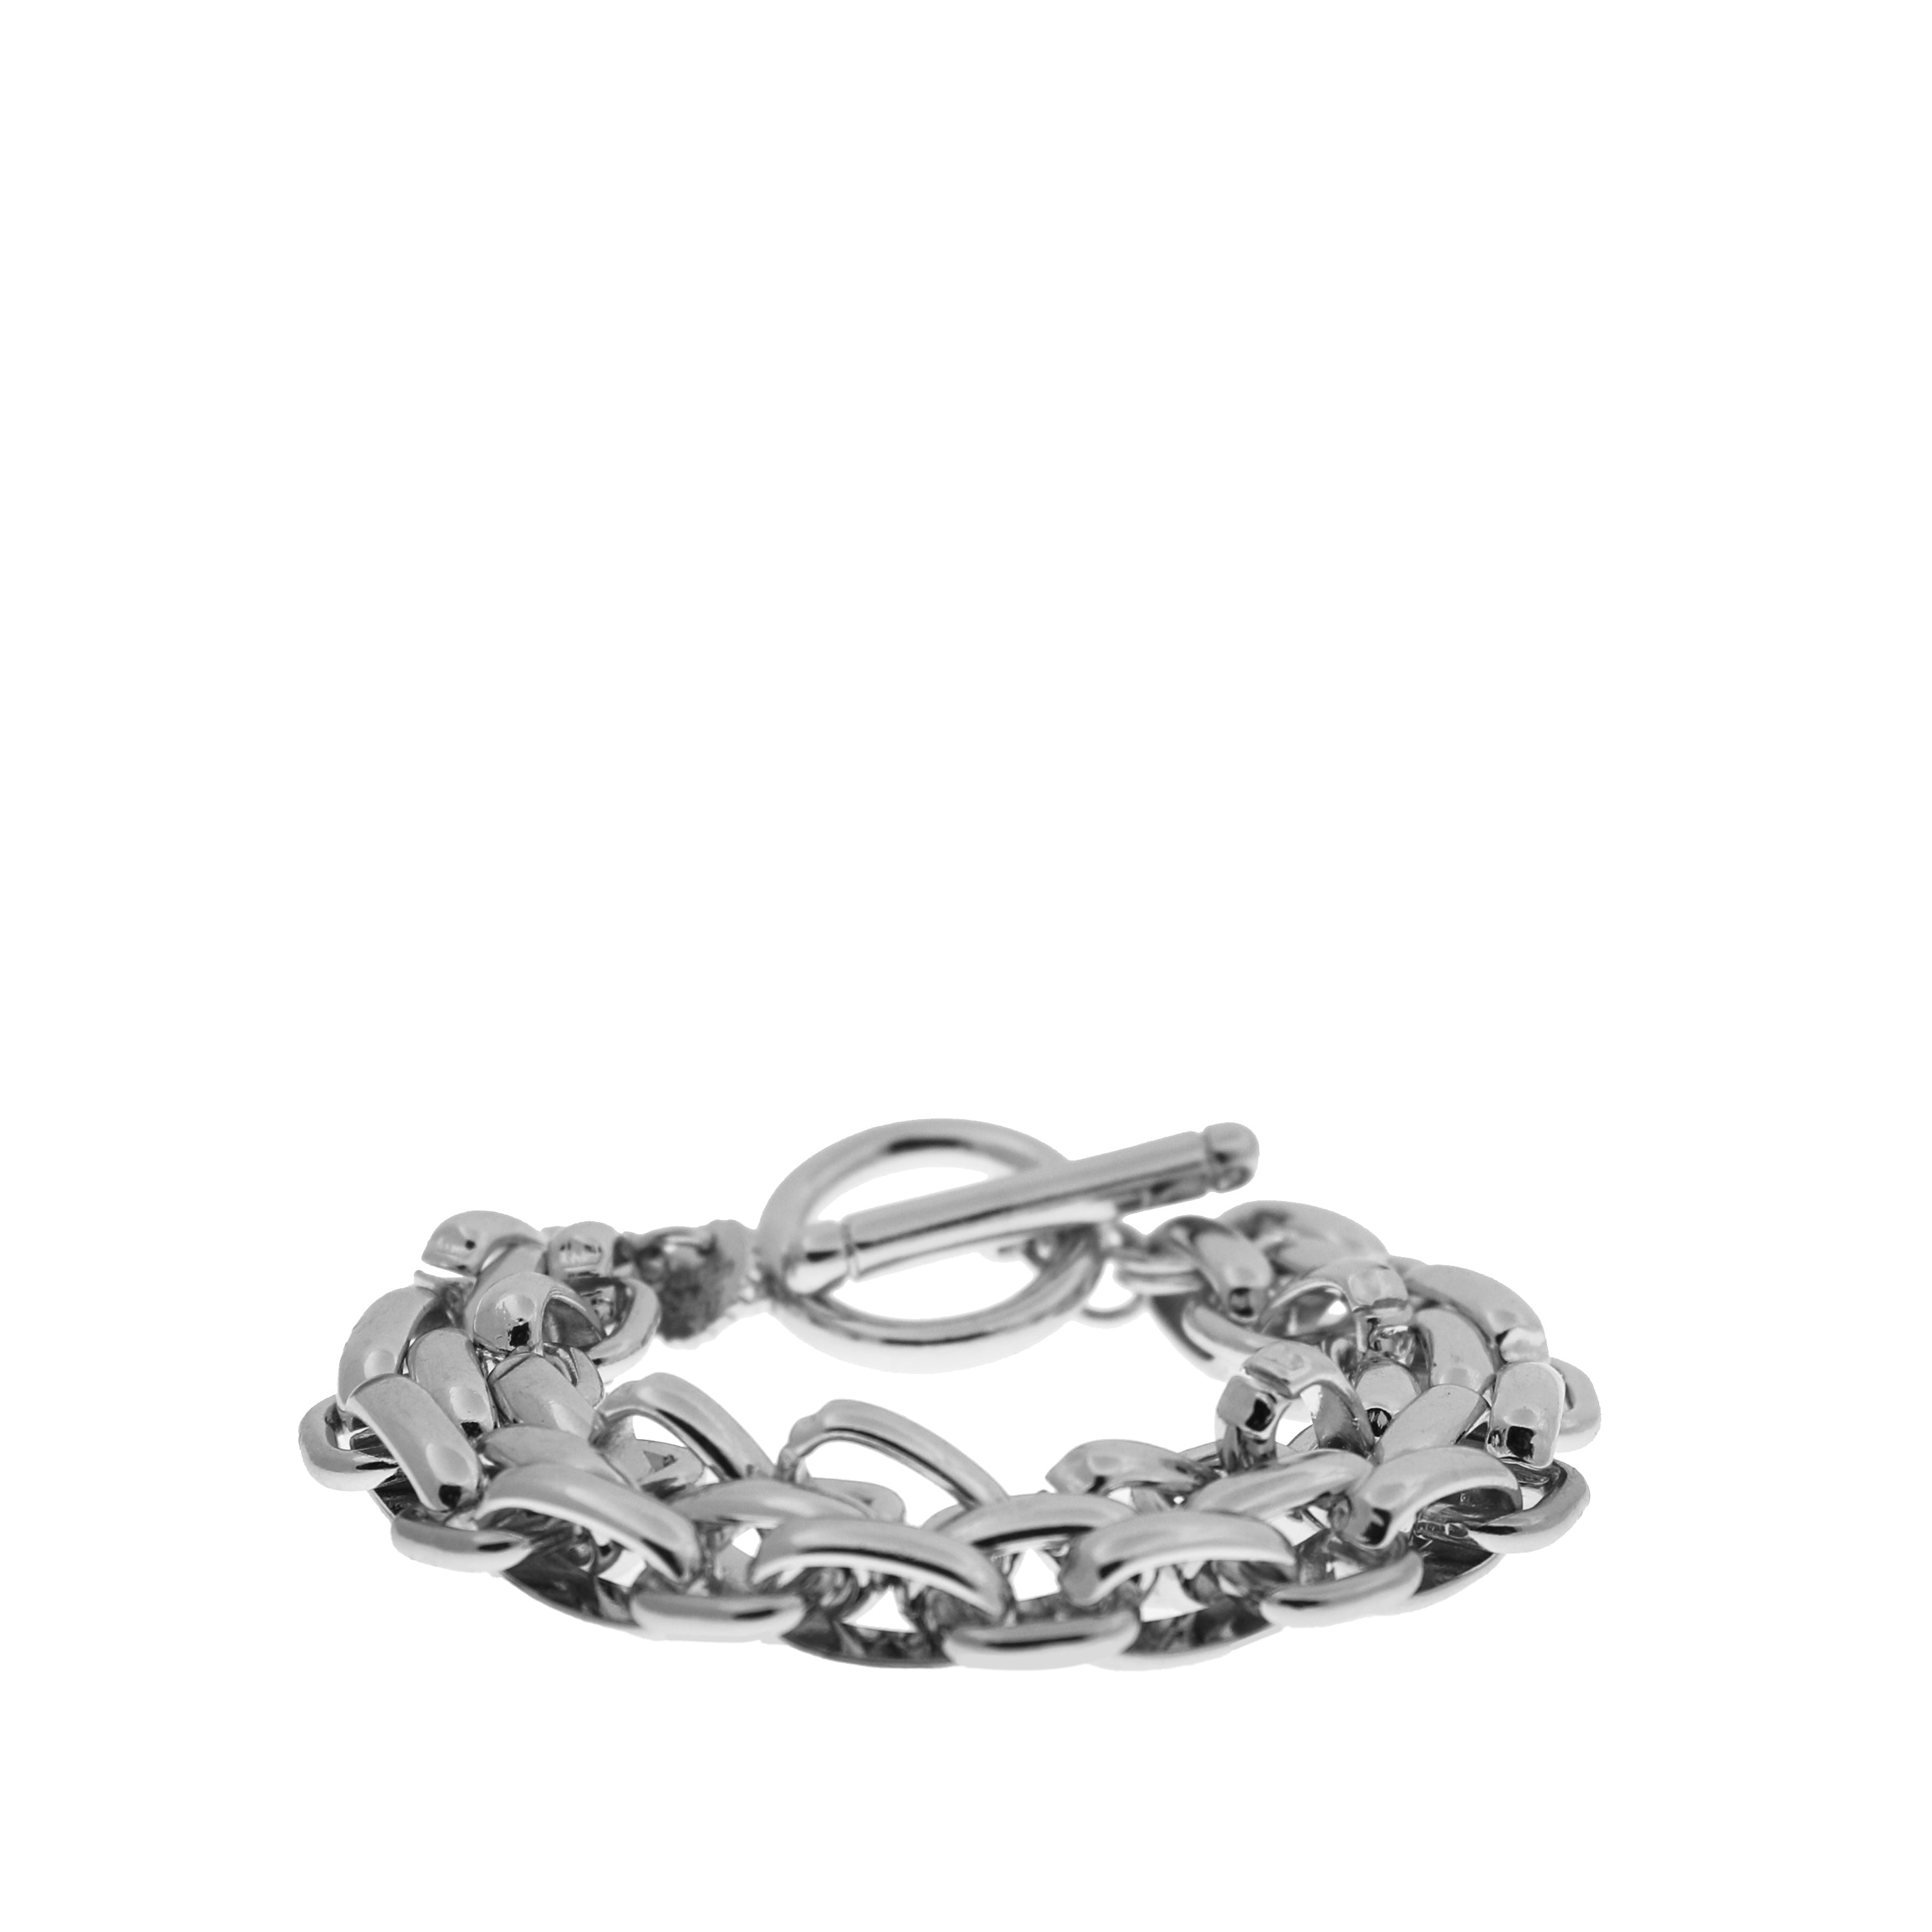 chain link heart clasp necklace – Marlyn Schiff, LLC